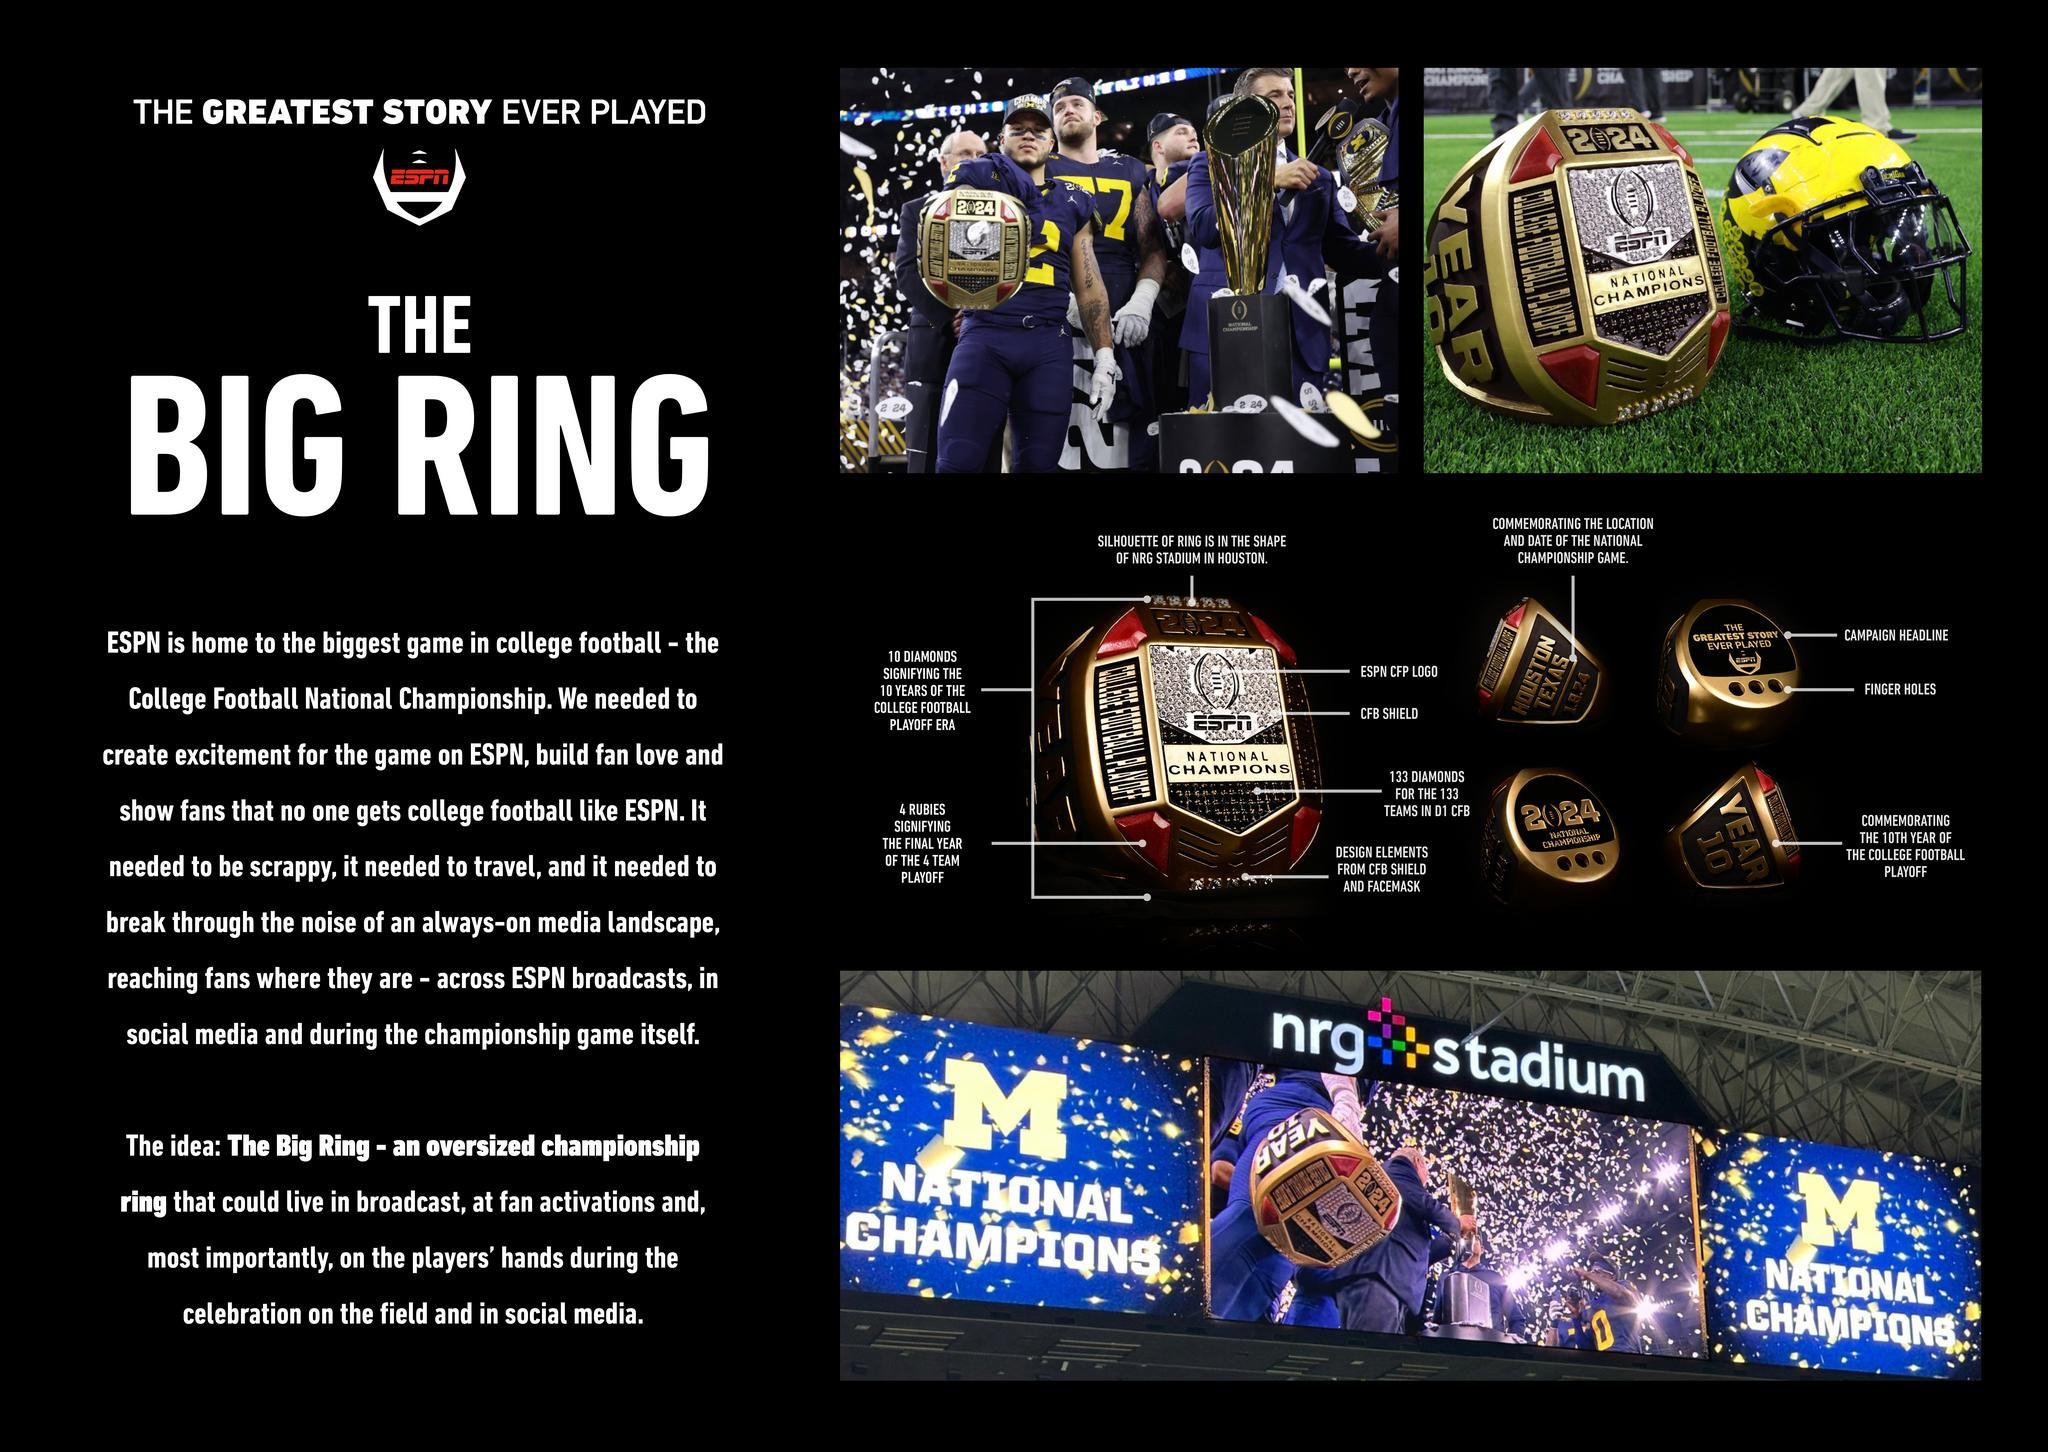 The Big Ring